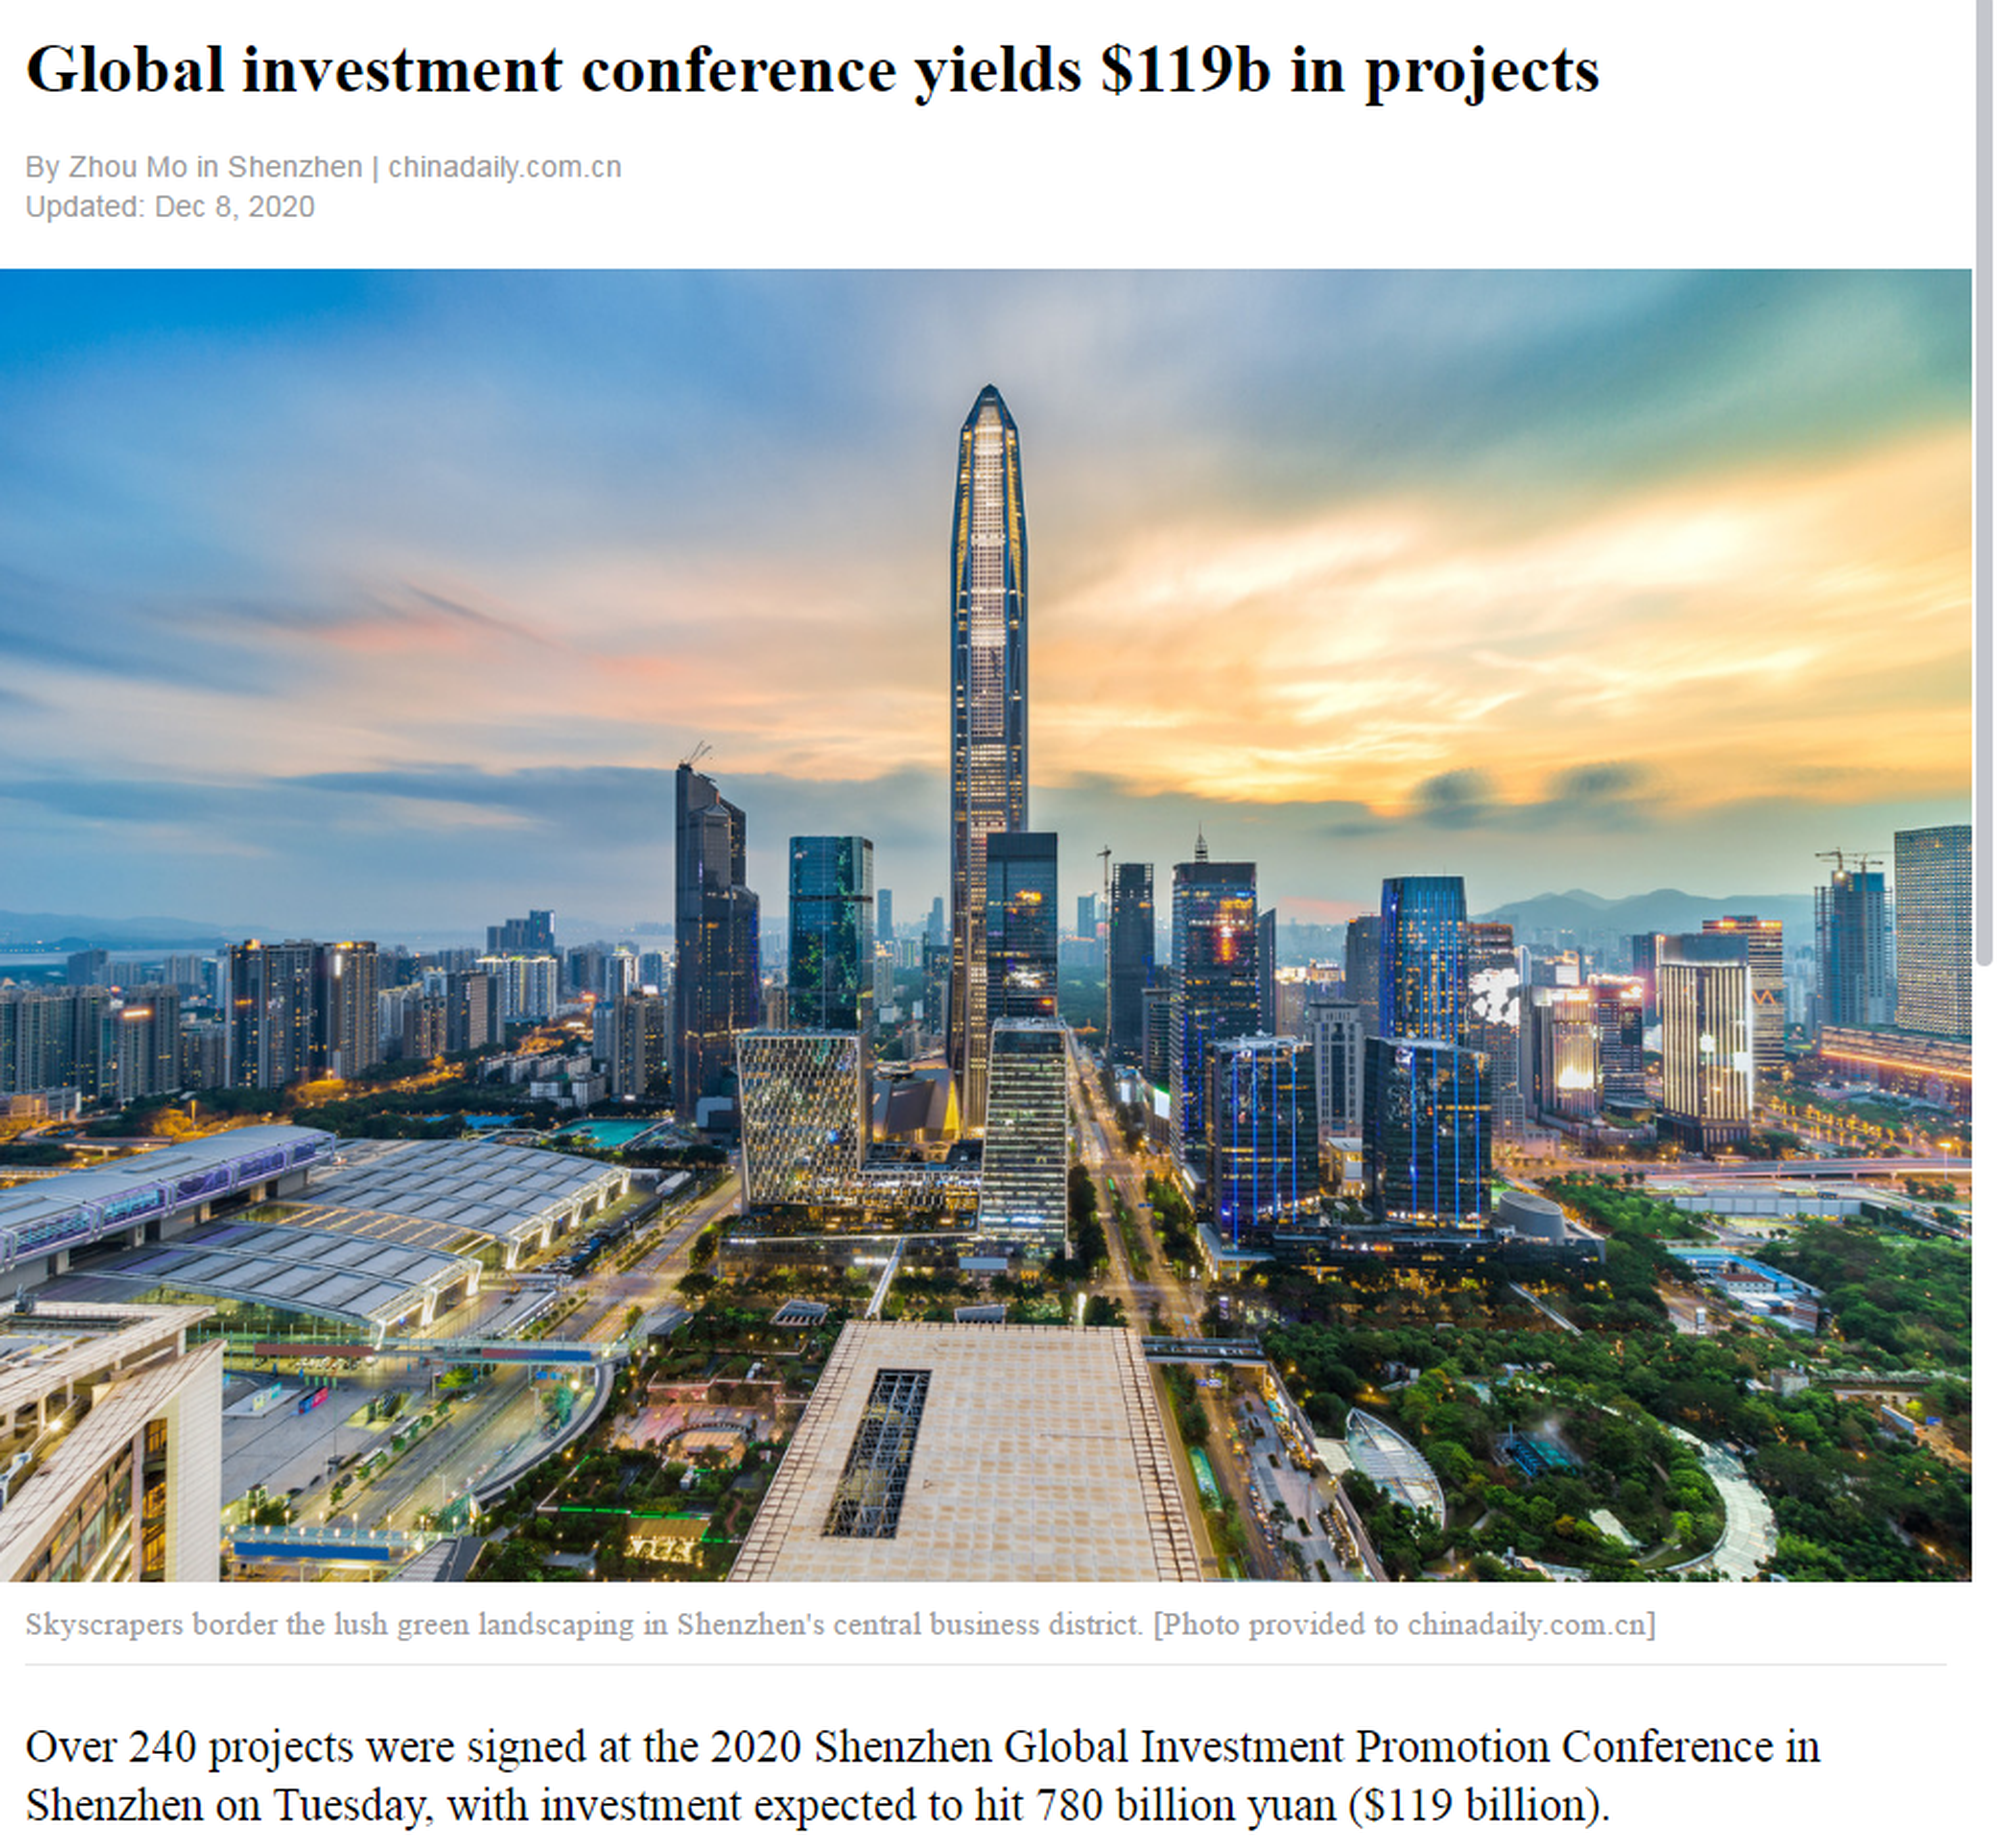 Global investment conference yields $119b in projects